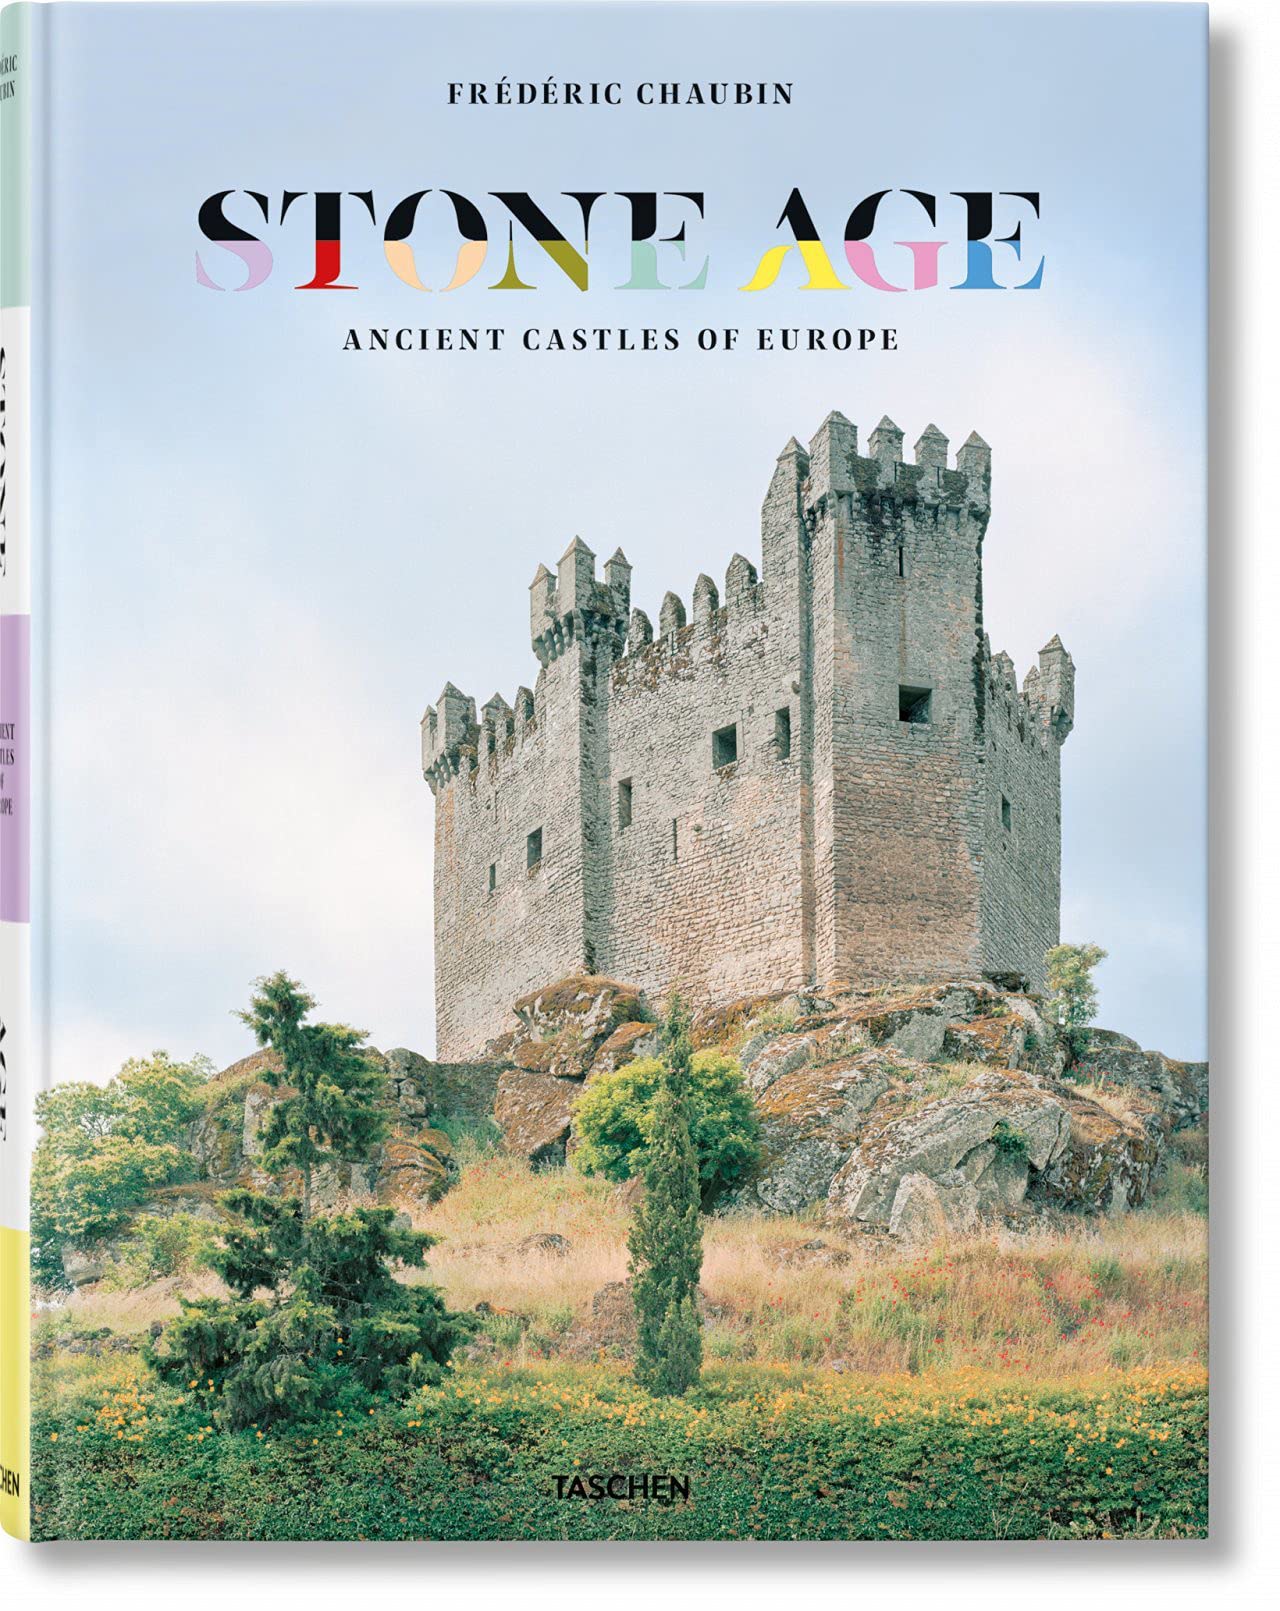 Stone Age. Ancient Castles of Europe. Frederic Chaubin. stone tft touch lcd screen monitor screen with rs232 rs485 ttl interface support any microcontroller